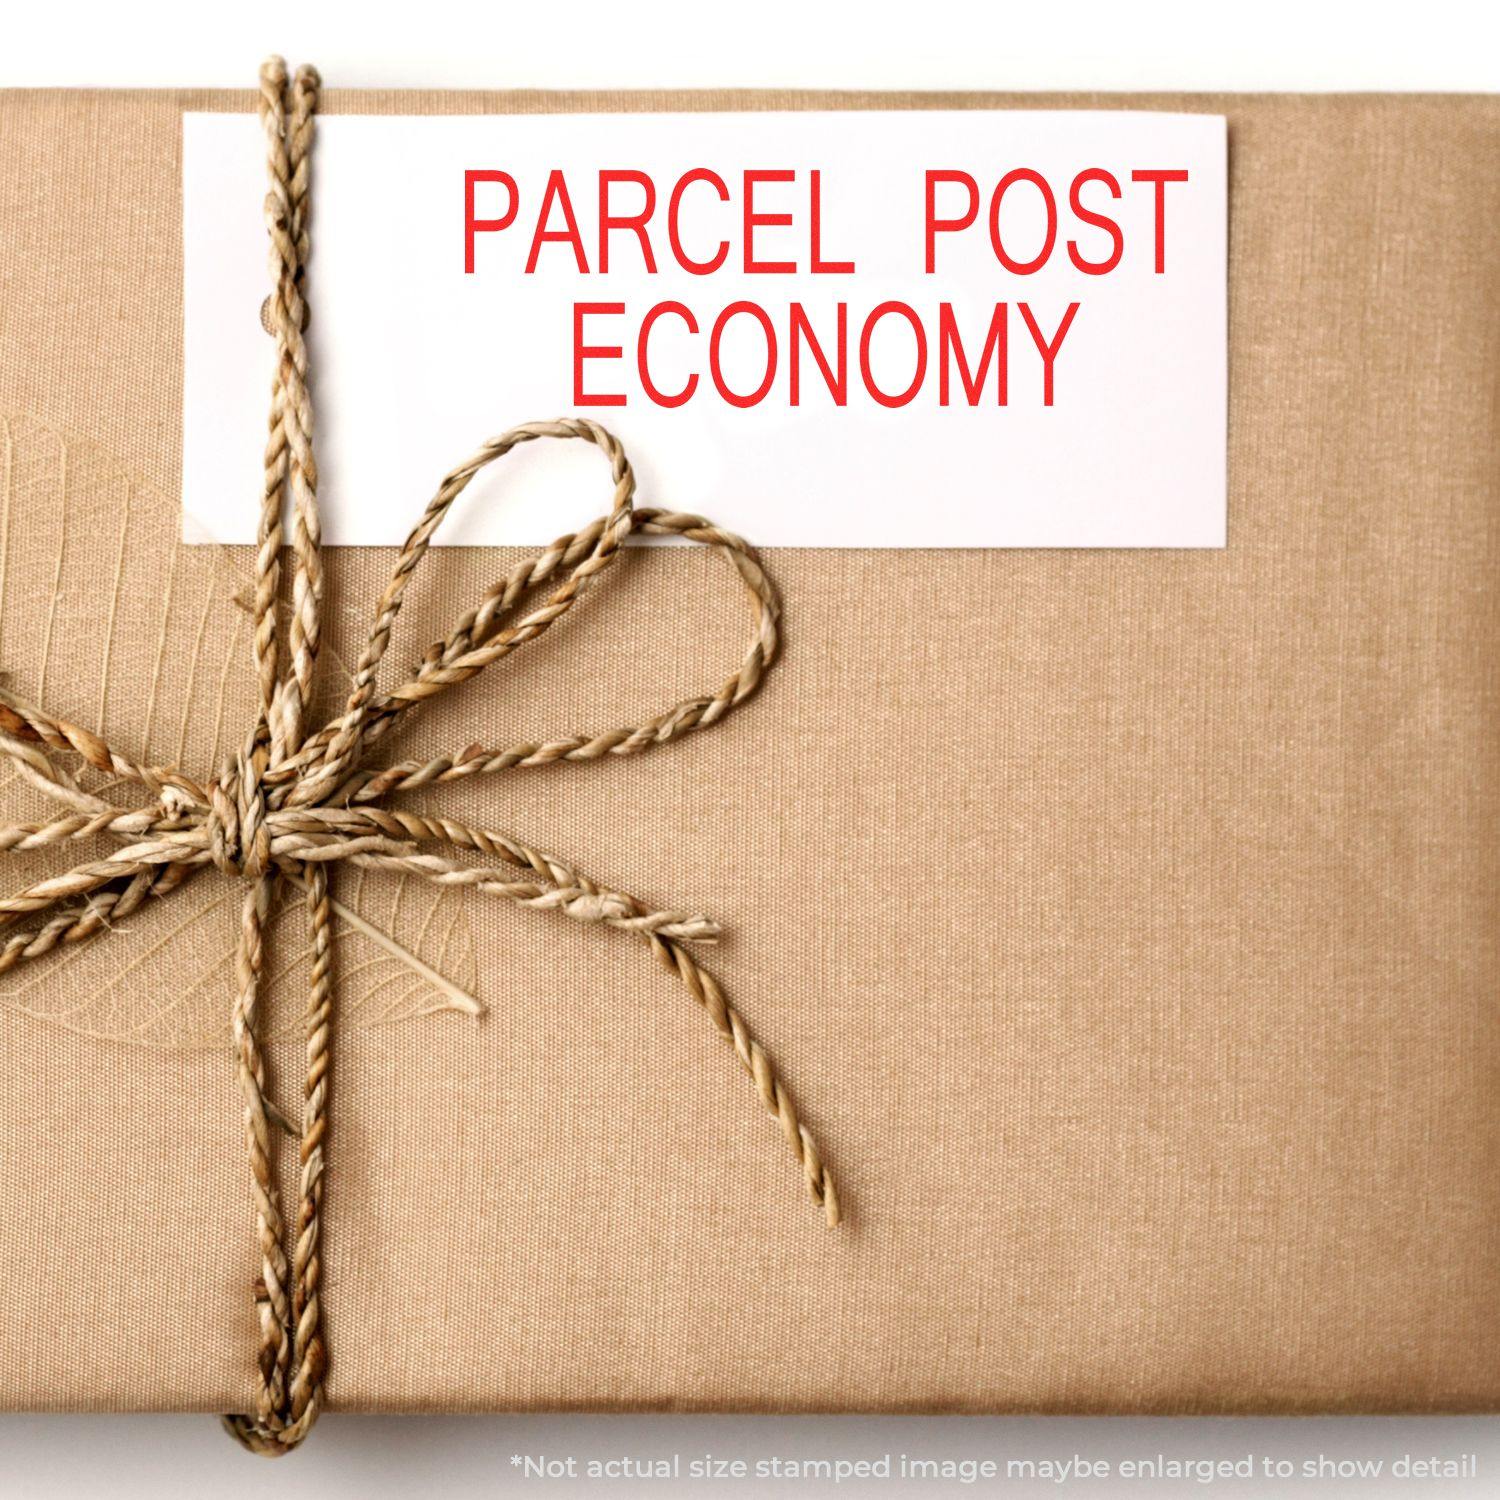 A stock office rubber stamp with a stamped image showing how the text "PARCEL POST ECONOMY" in a large font is displayed after stamping.